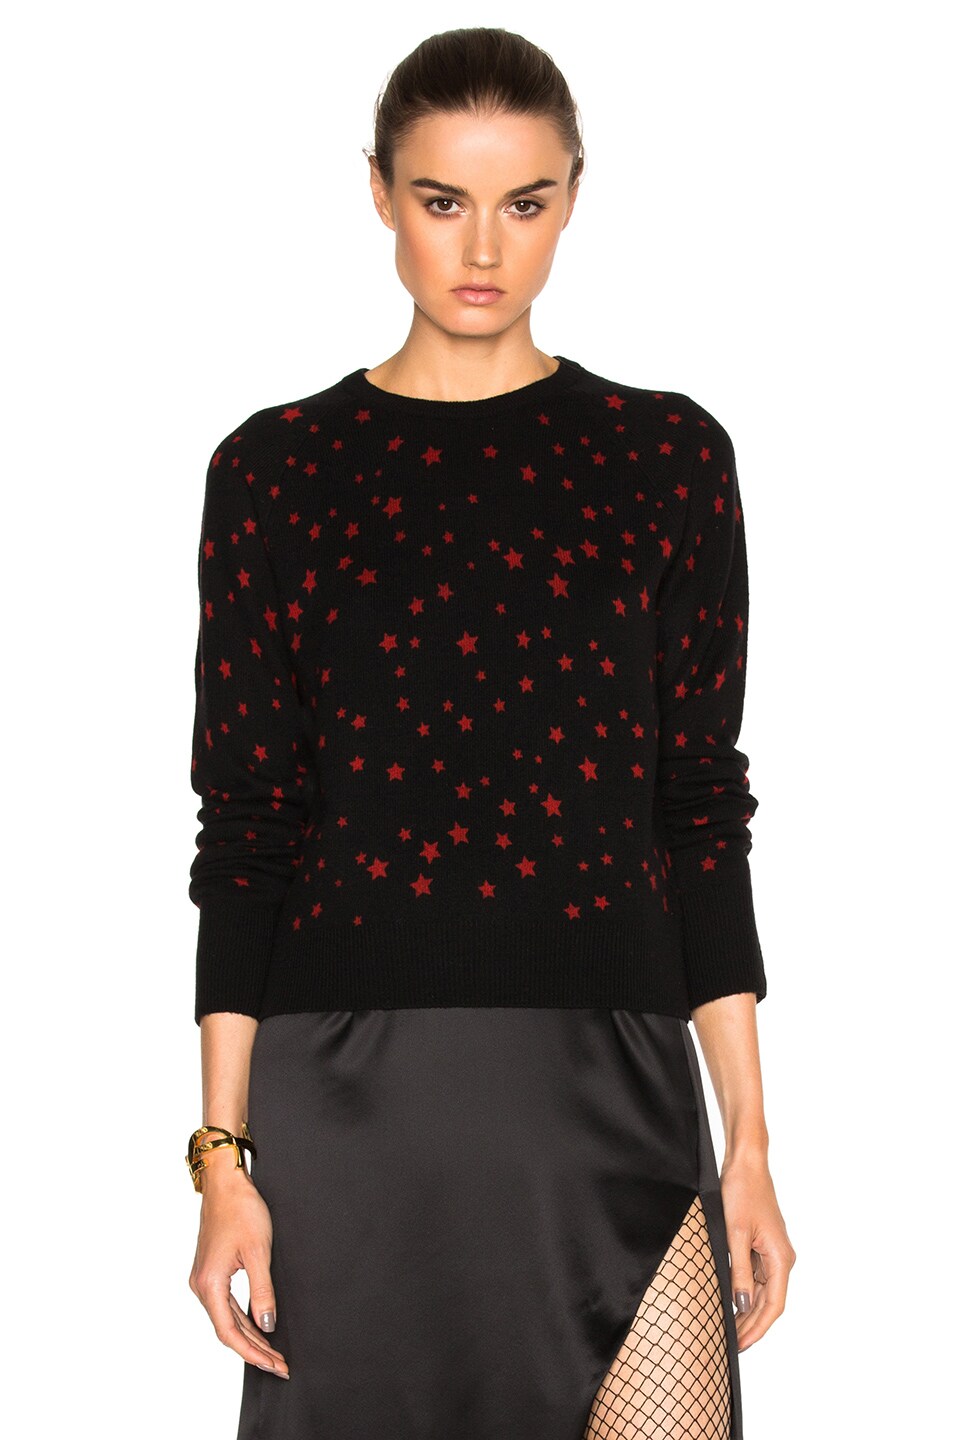 Image 1 of Equipment x Kate Moss Ryder Crew Sweater in Black & Cherry Red